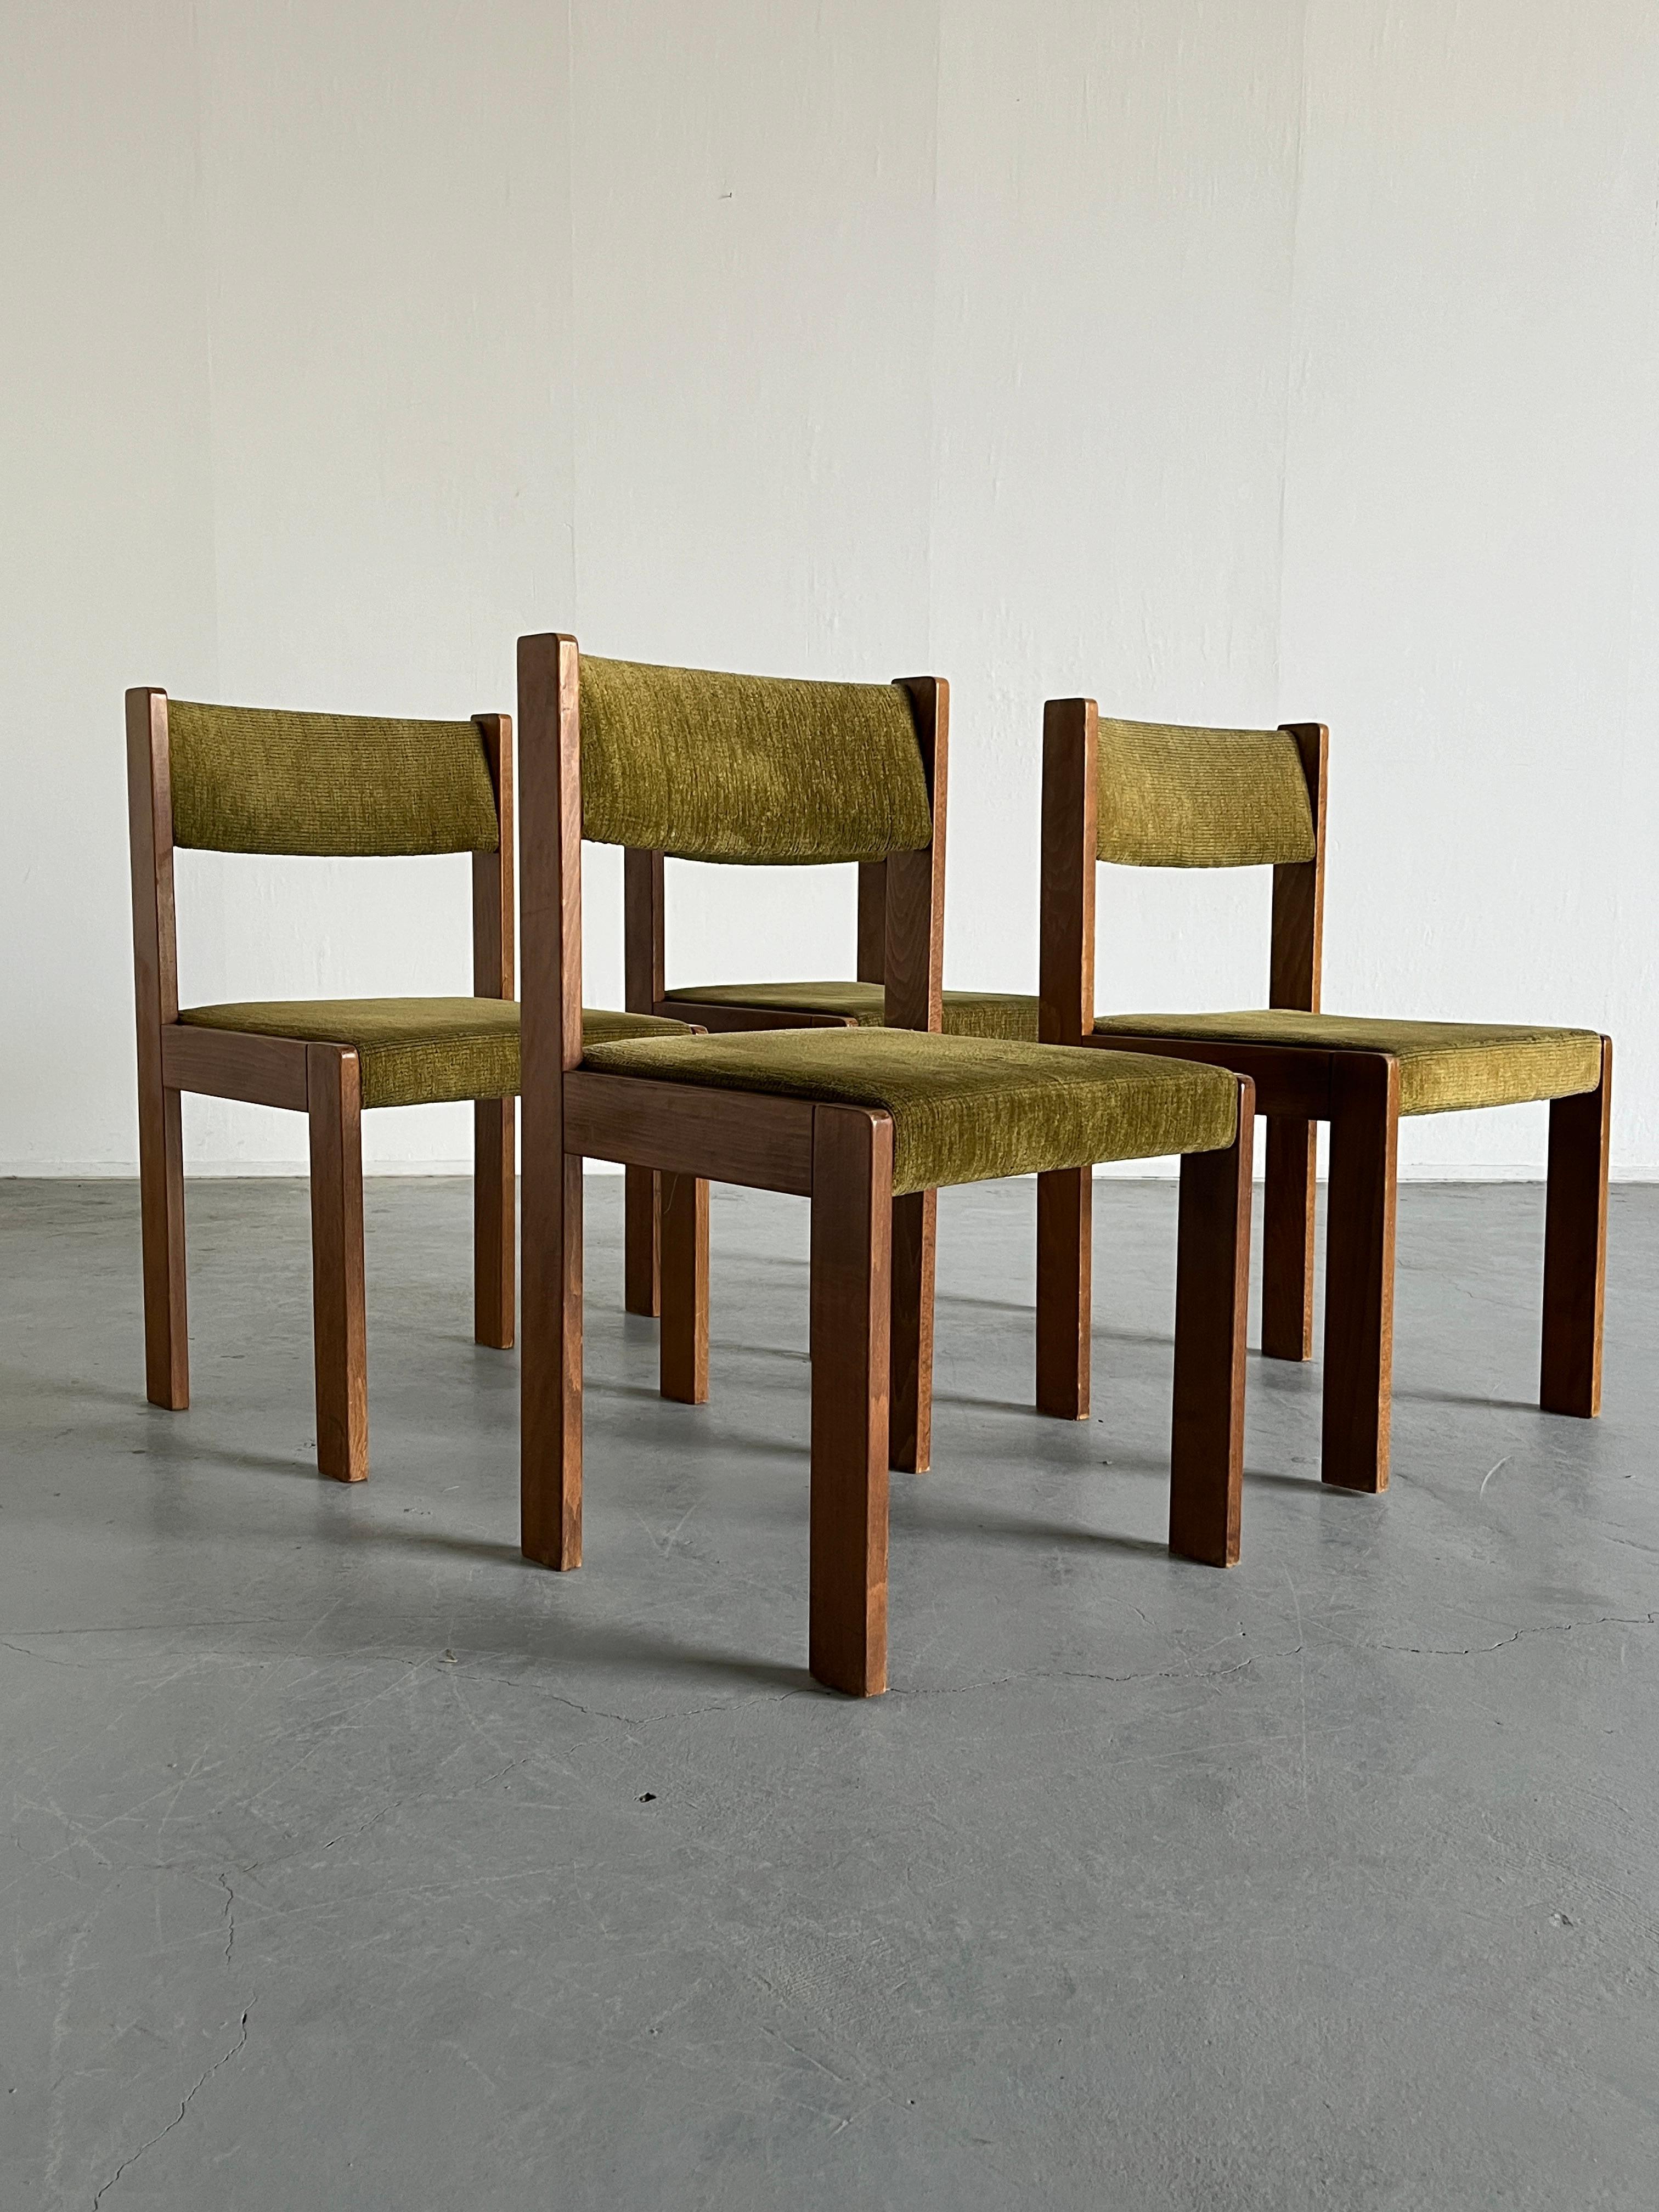 Beautiful and elegant Mid-century modern wood and mustard green upholstery dining chairs.

Produced by the iconic Austrian furniture manufacturer 'Wiesner Hager' during the 1960s, following the constructivist style of 'Monk' chairs by Tobia